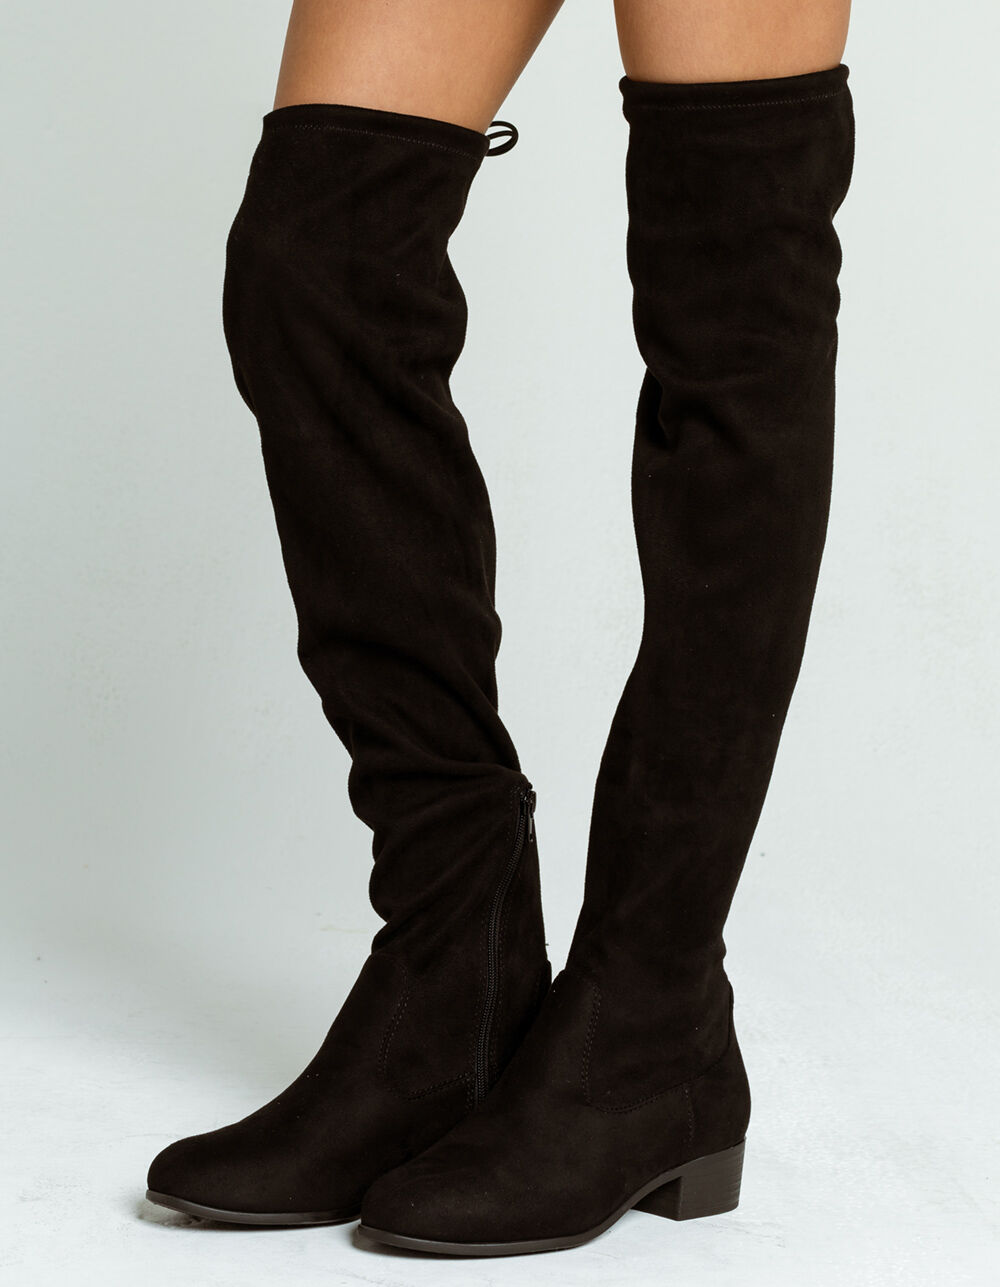 SODA Over The Knee Womens Boots - BLACK | Tillys